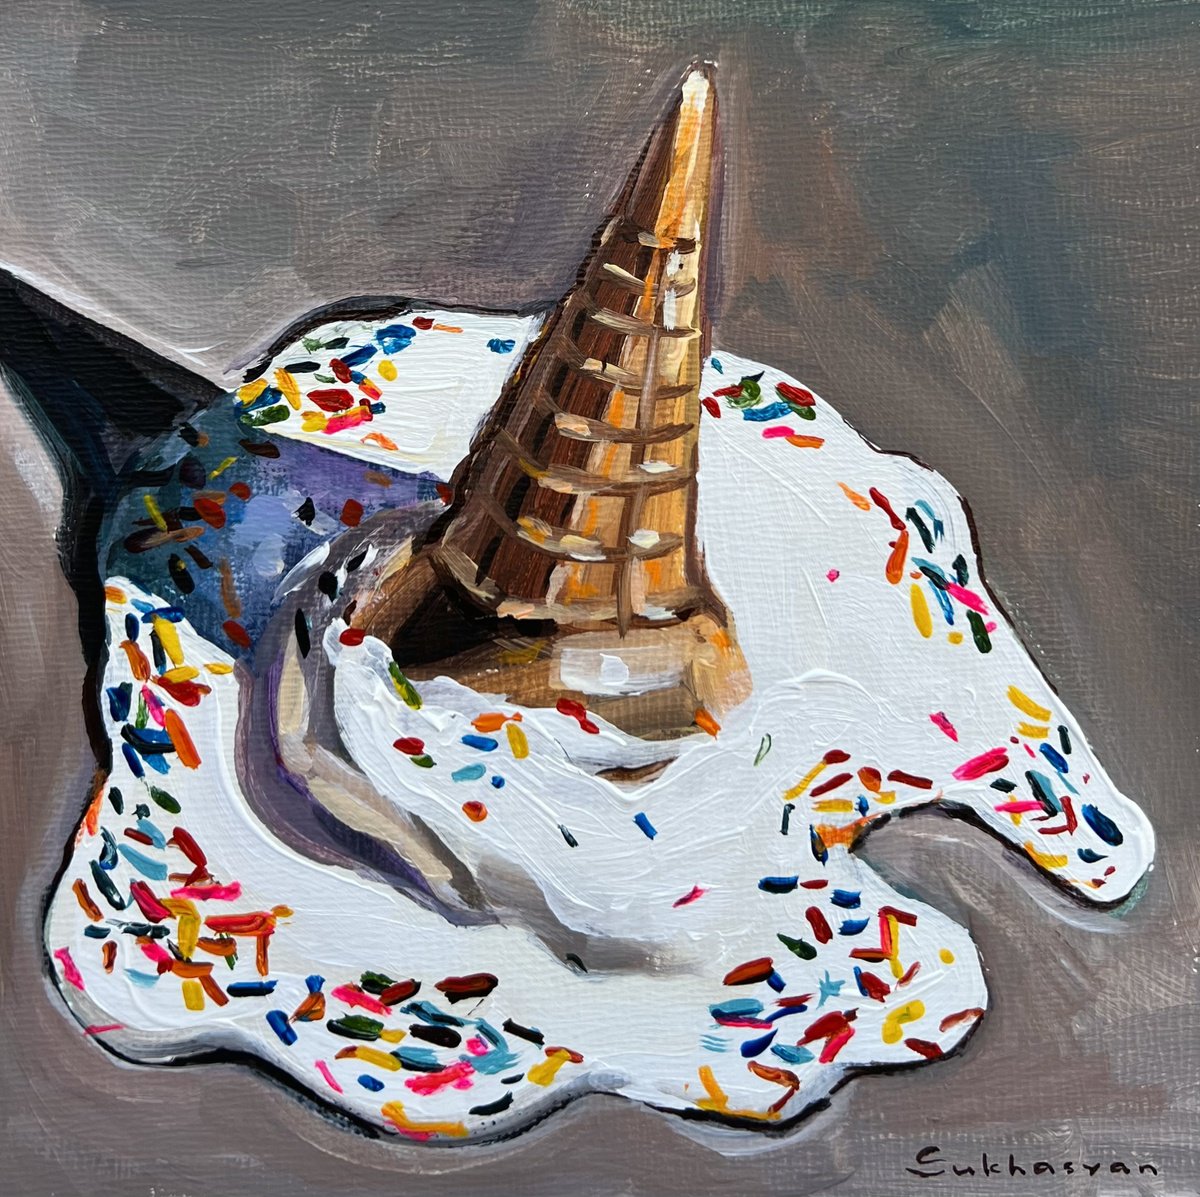 Still Life with Melted Icecream by Victoria Sukhasyan